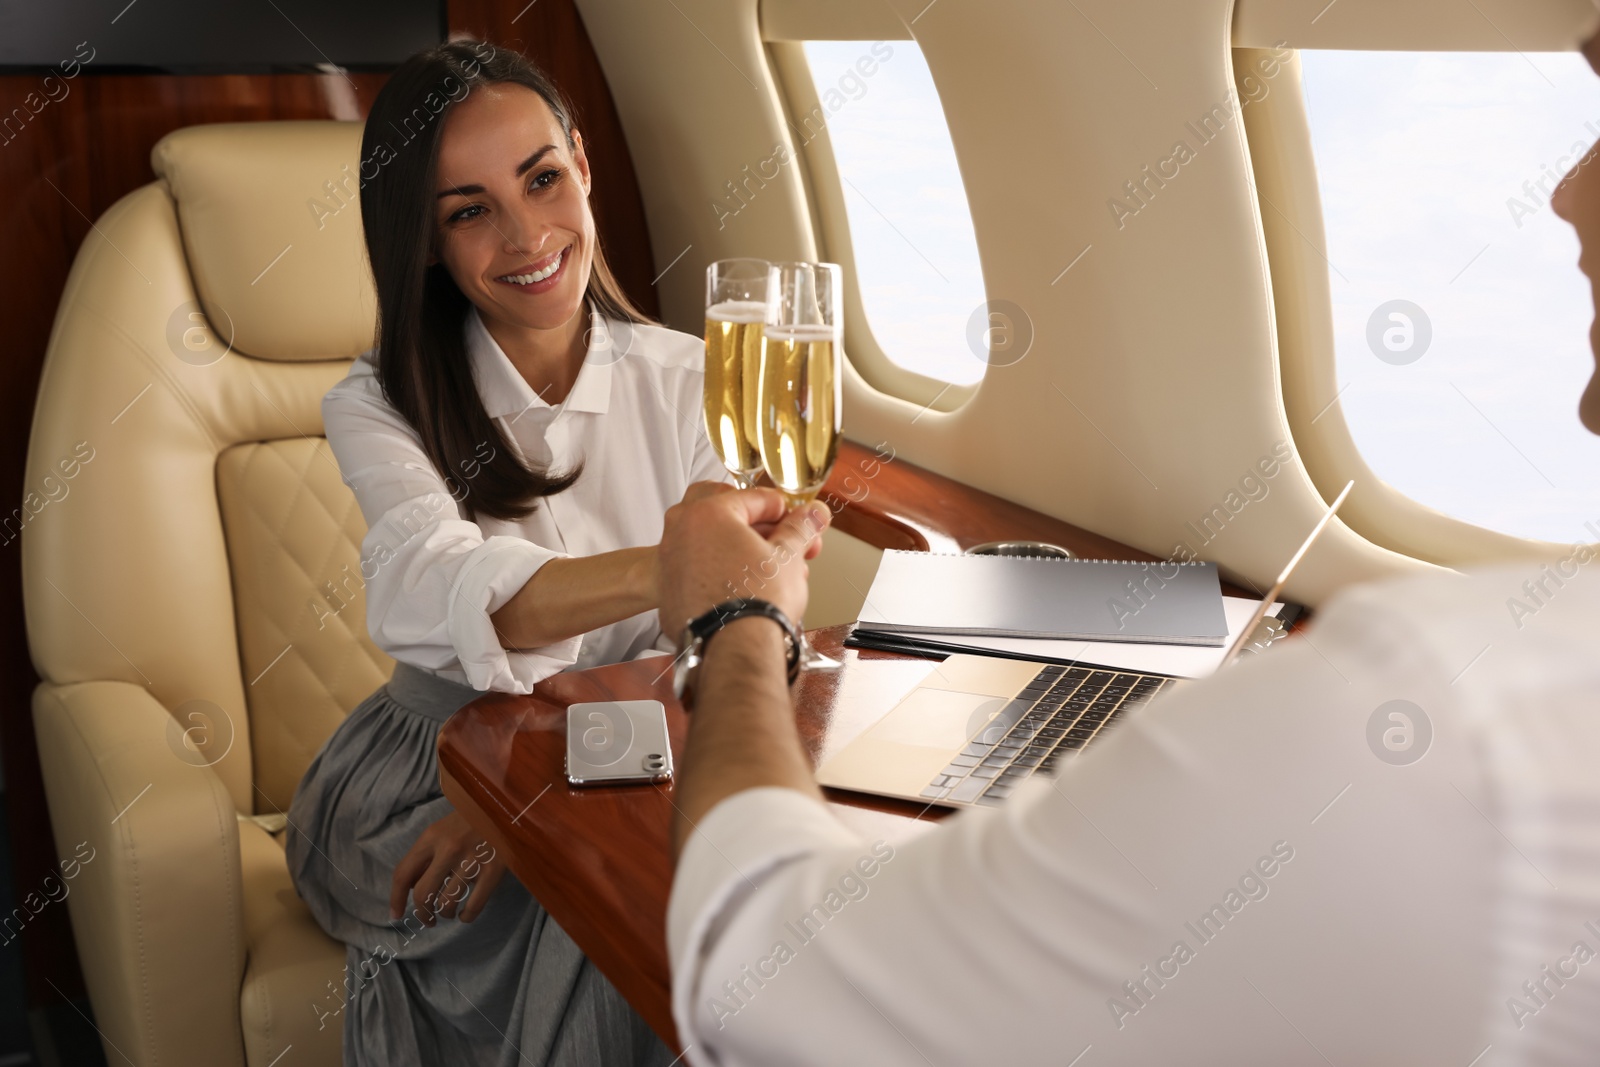 Photo of Colleagues clinking glasses of champagne at table in airplane during flight